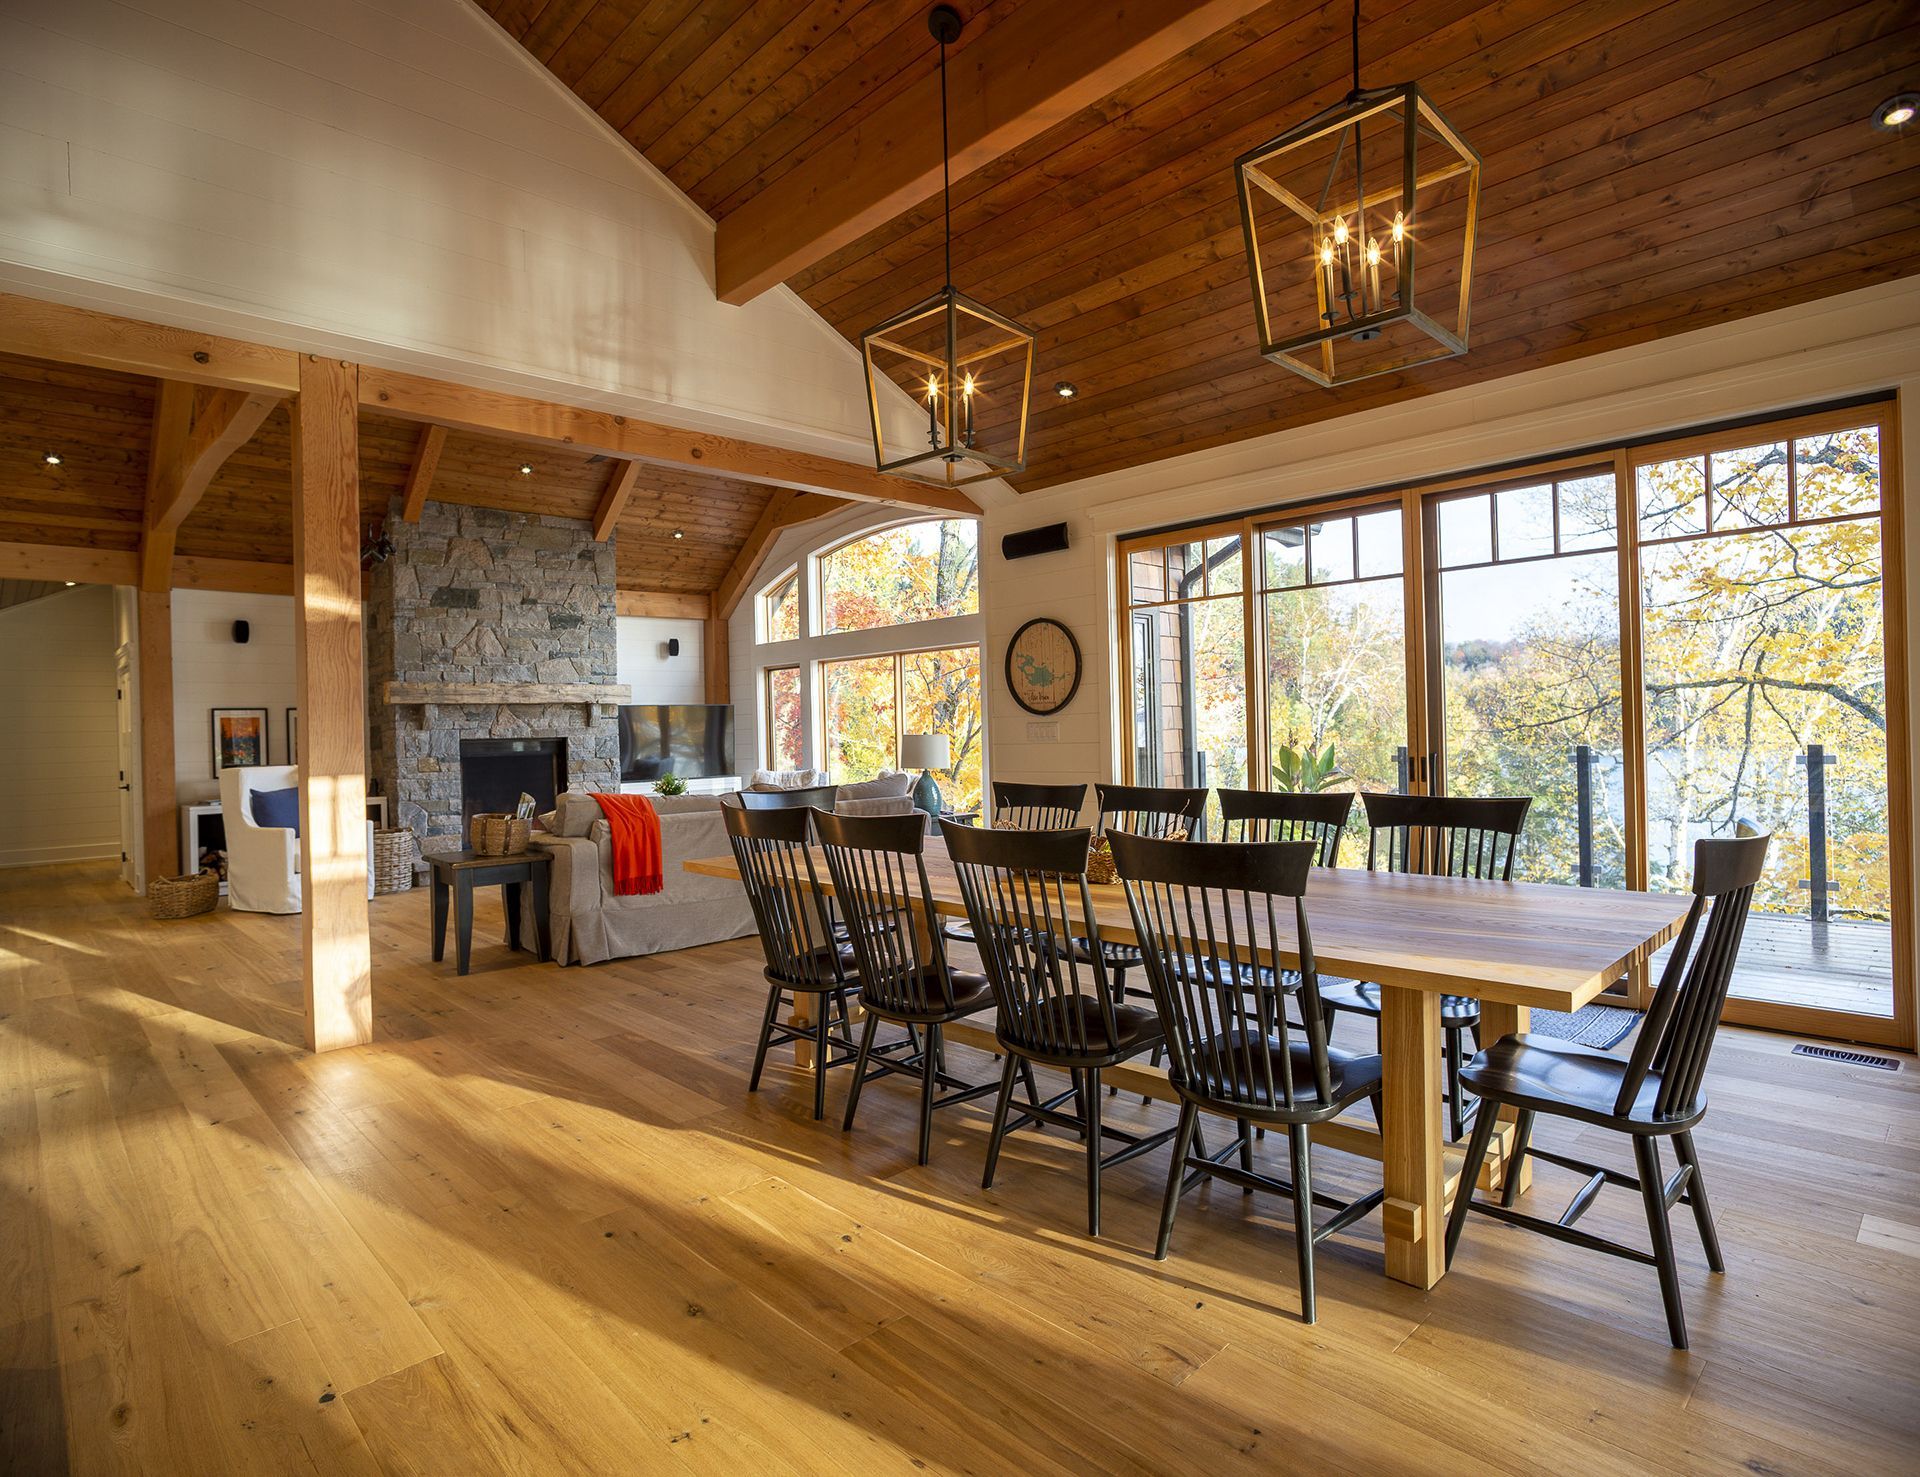 Large windows and wood beams in a Muskoka cottage design.